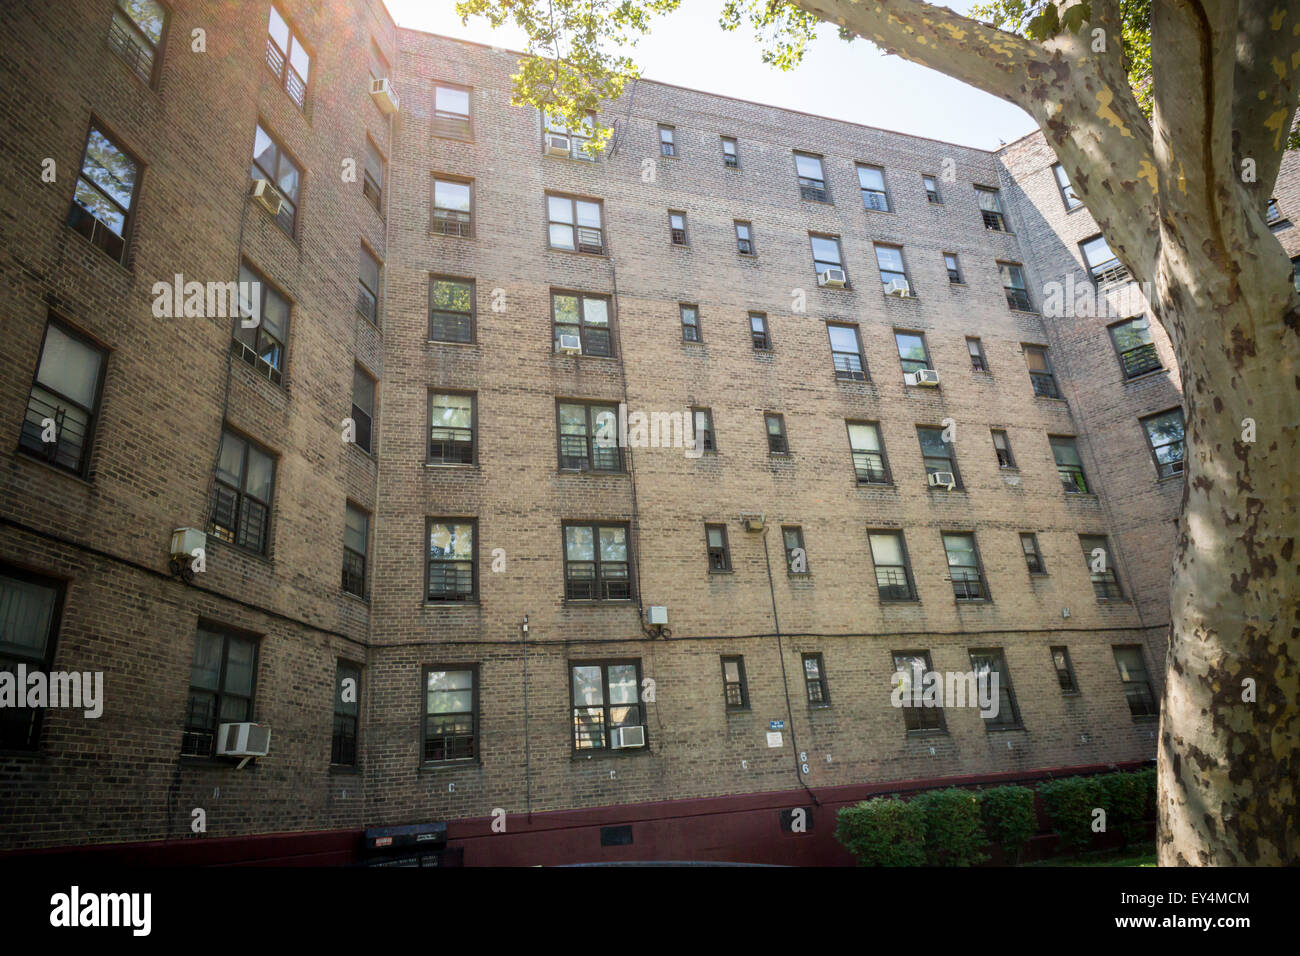 The Queensbridge South Houses in Queens in New York on Thursday, July 16, 2015. New York will be providing free broadband access to five housing projects in the city via a pilot program ConnectHome. Besides the Queensbridge North and South projects, Mott Haven and Red Hook East and West will be part of the program. Queensbridge is the largest housing project in the country and the program will provide access to 16,000 residents out of the 400,000 living in NYCHA projects.  (© Richard B. Levine) Stock Photo